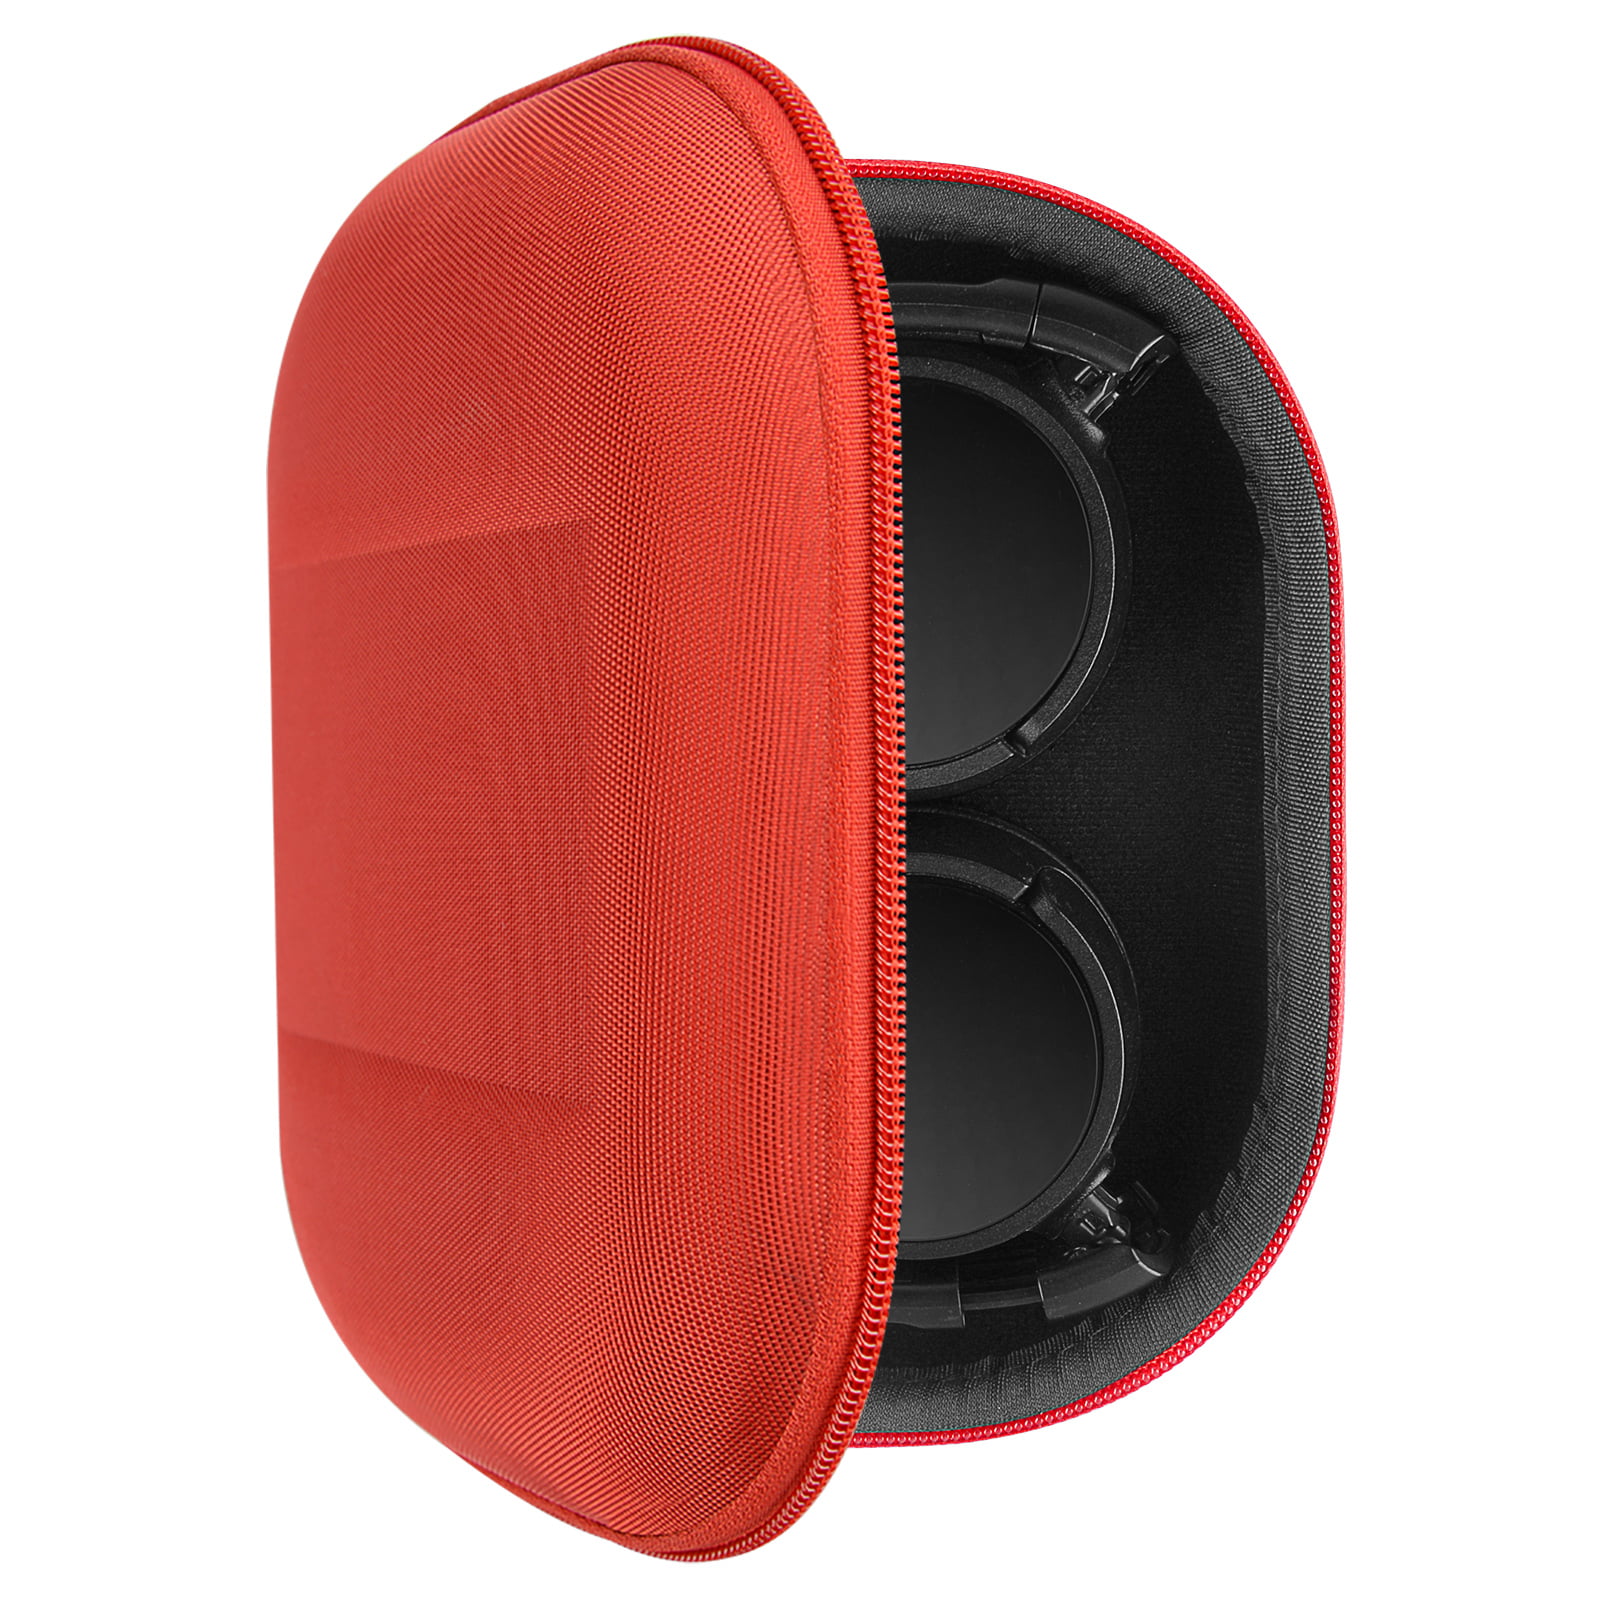 Ear Pads Pillow Earpads Cushion for Sony MDR-ZX310 MDR-ZX110 MDR-ZX300 MDR-ZX100 